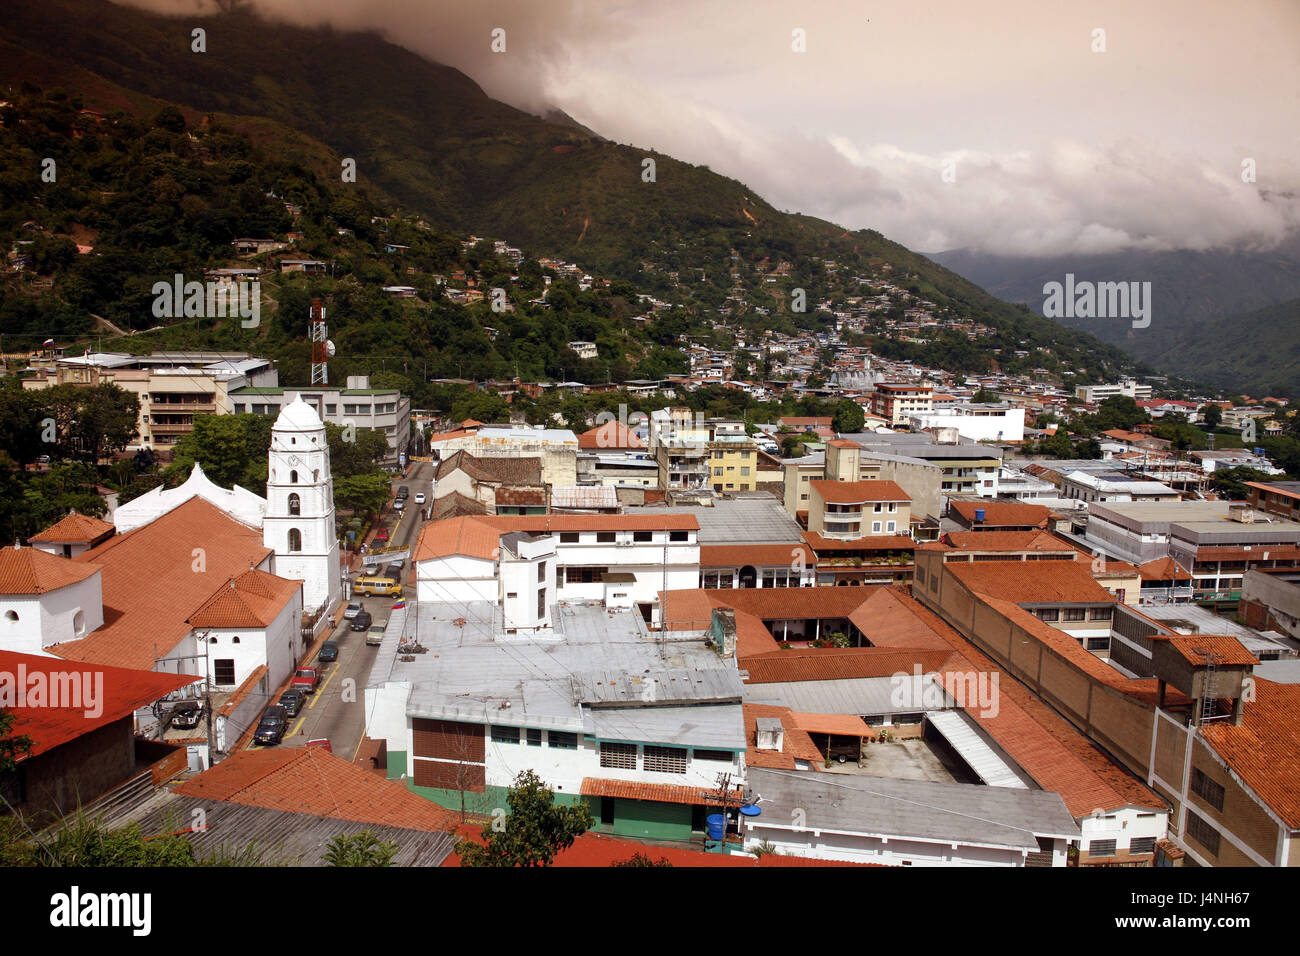 Venezuela, the Andes, Trujillo, town overview, Stock Photo